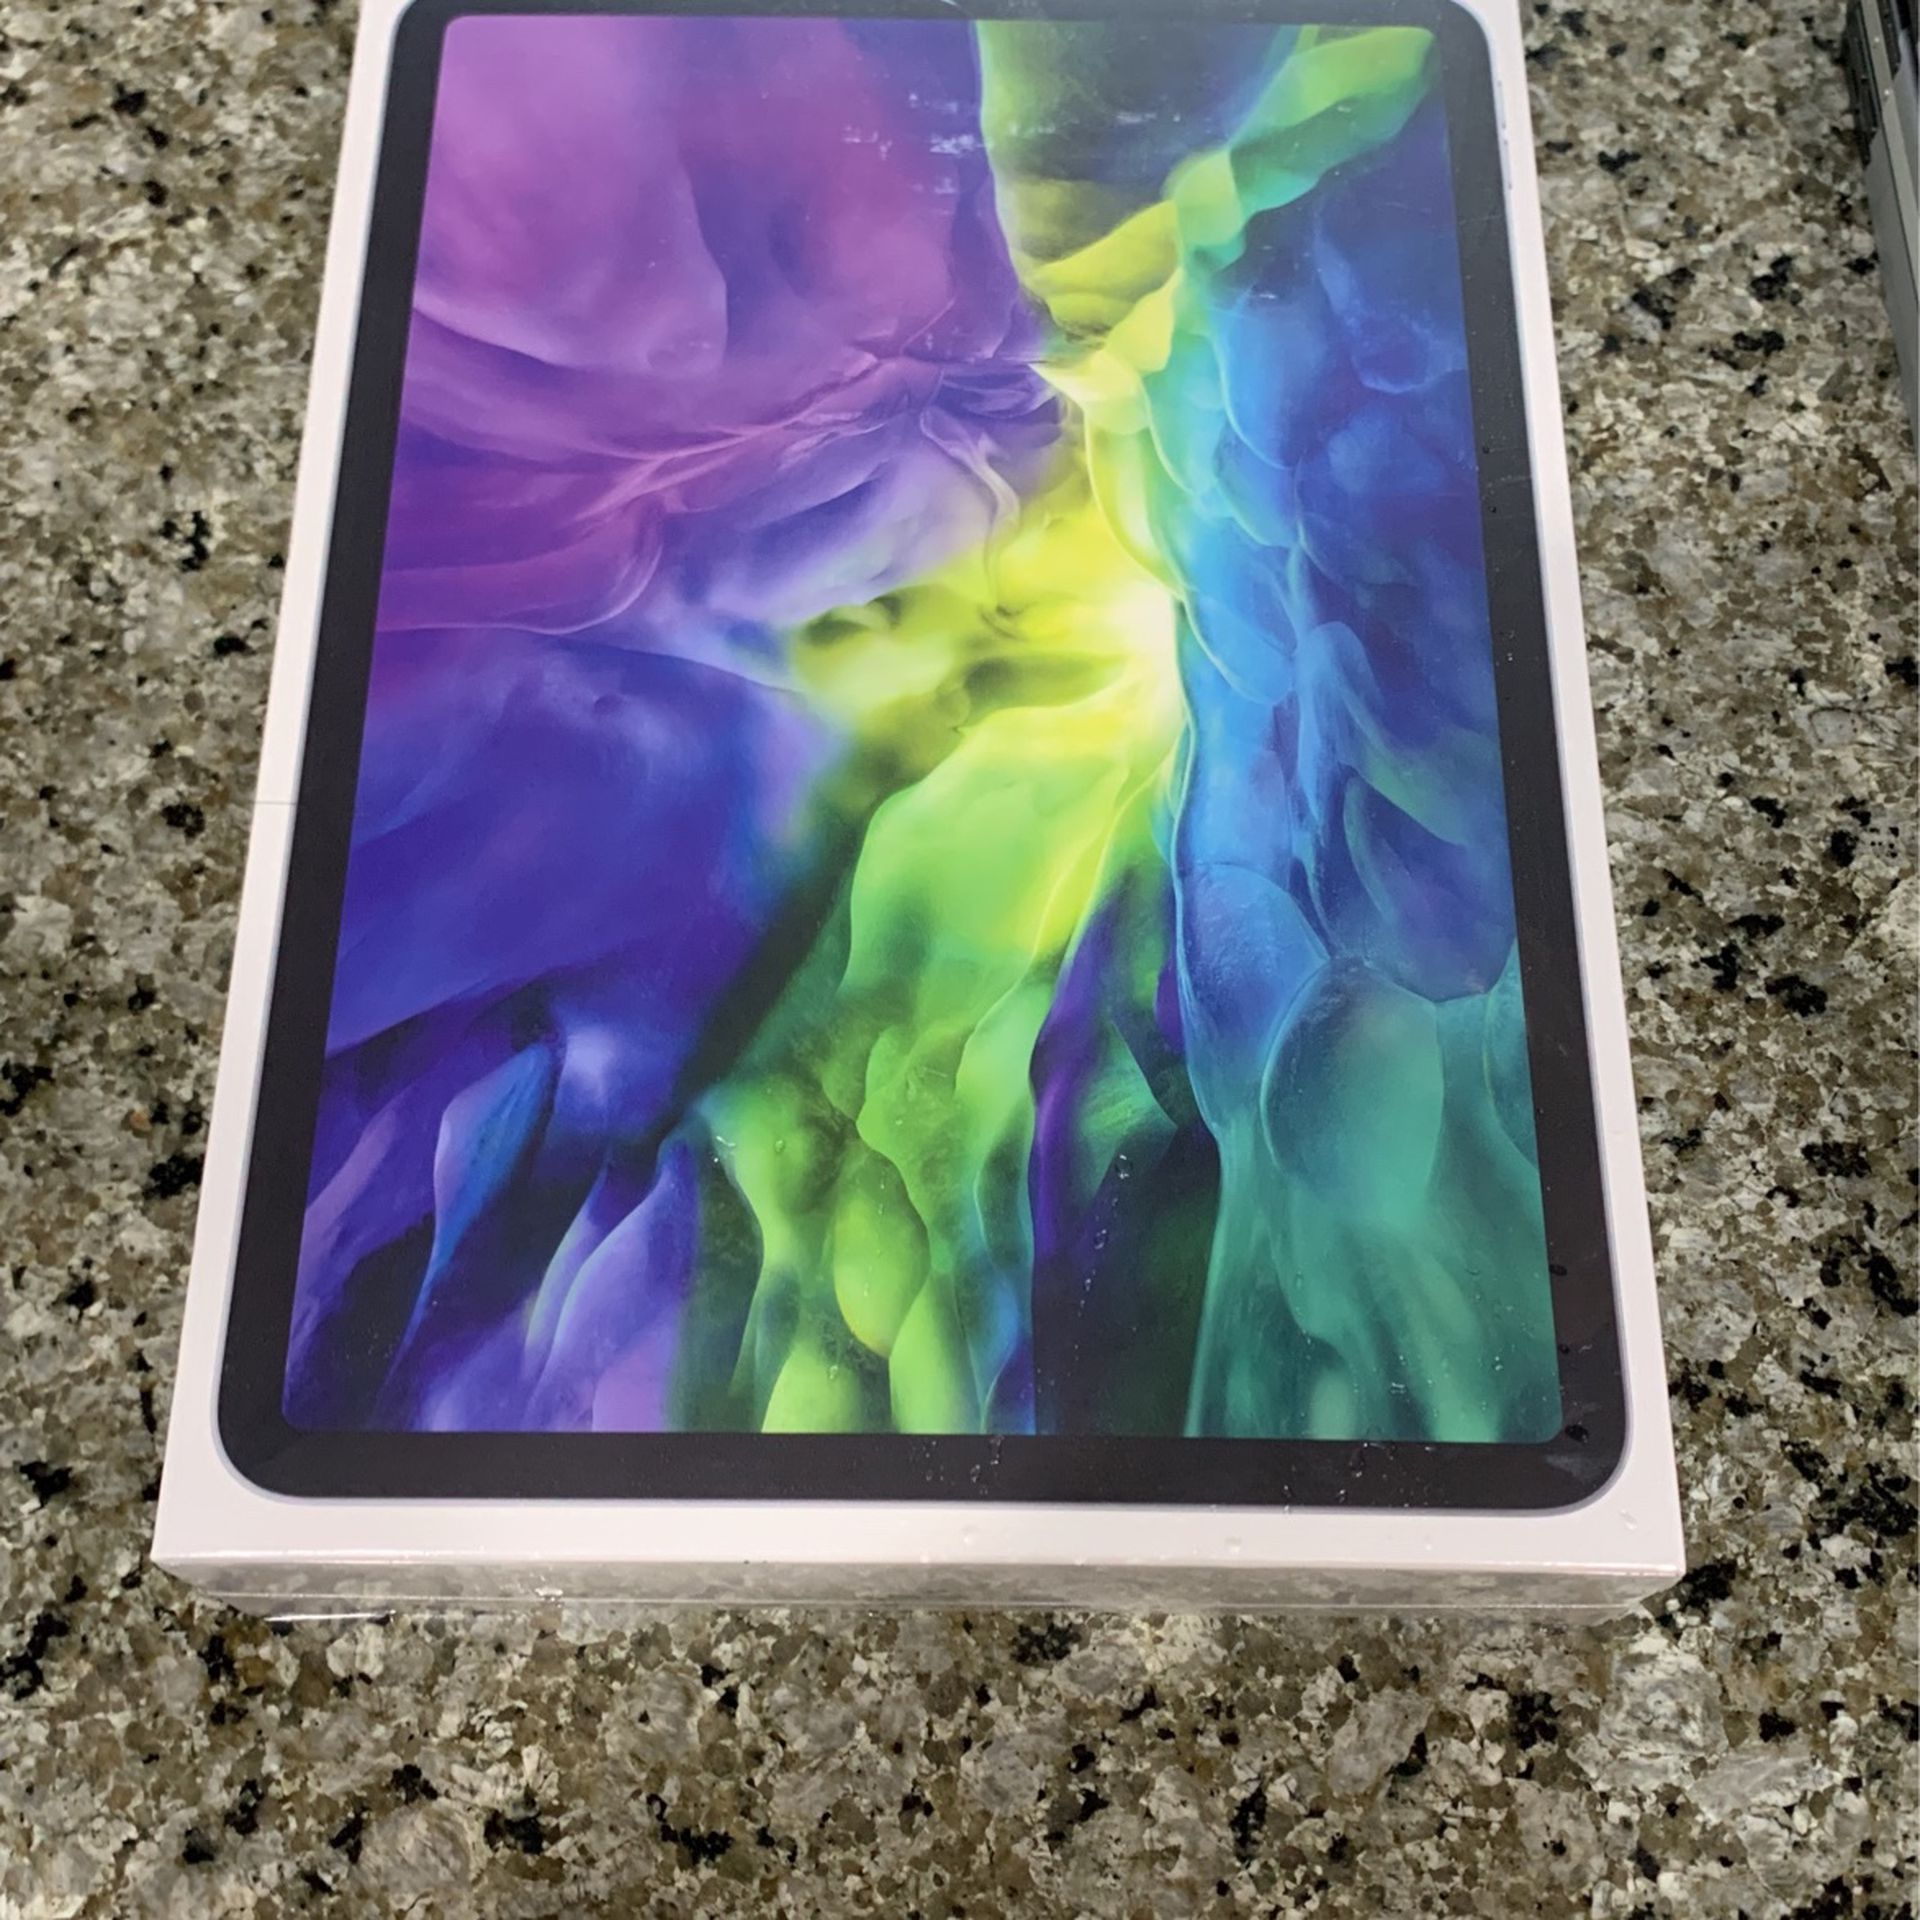 iPad Pro 11 Inch 256gb WiFi Only Sealed